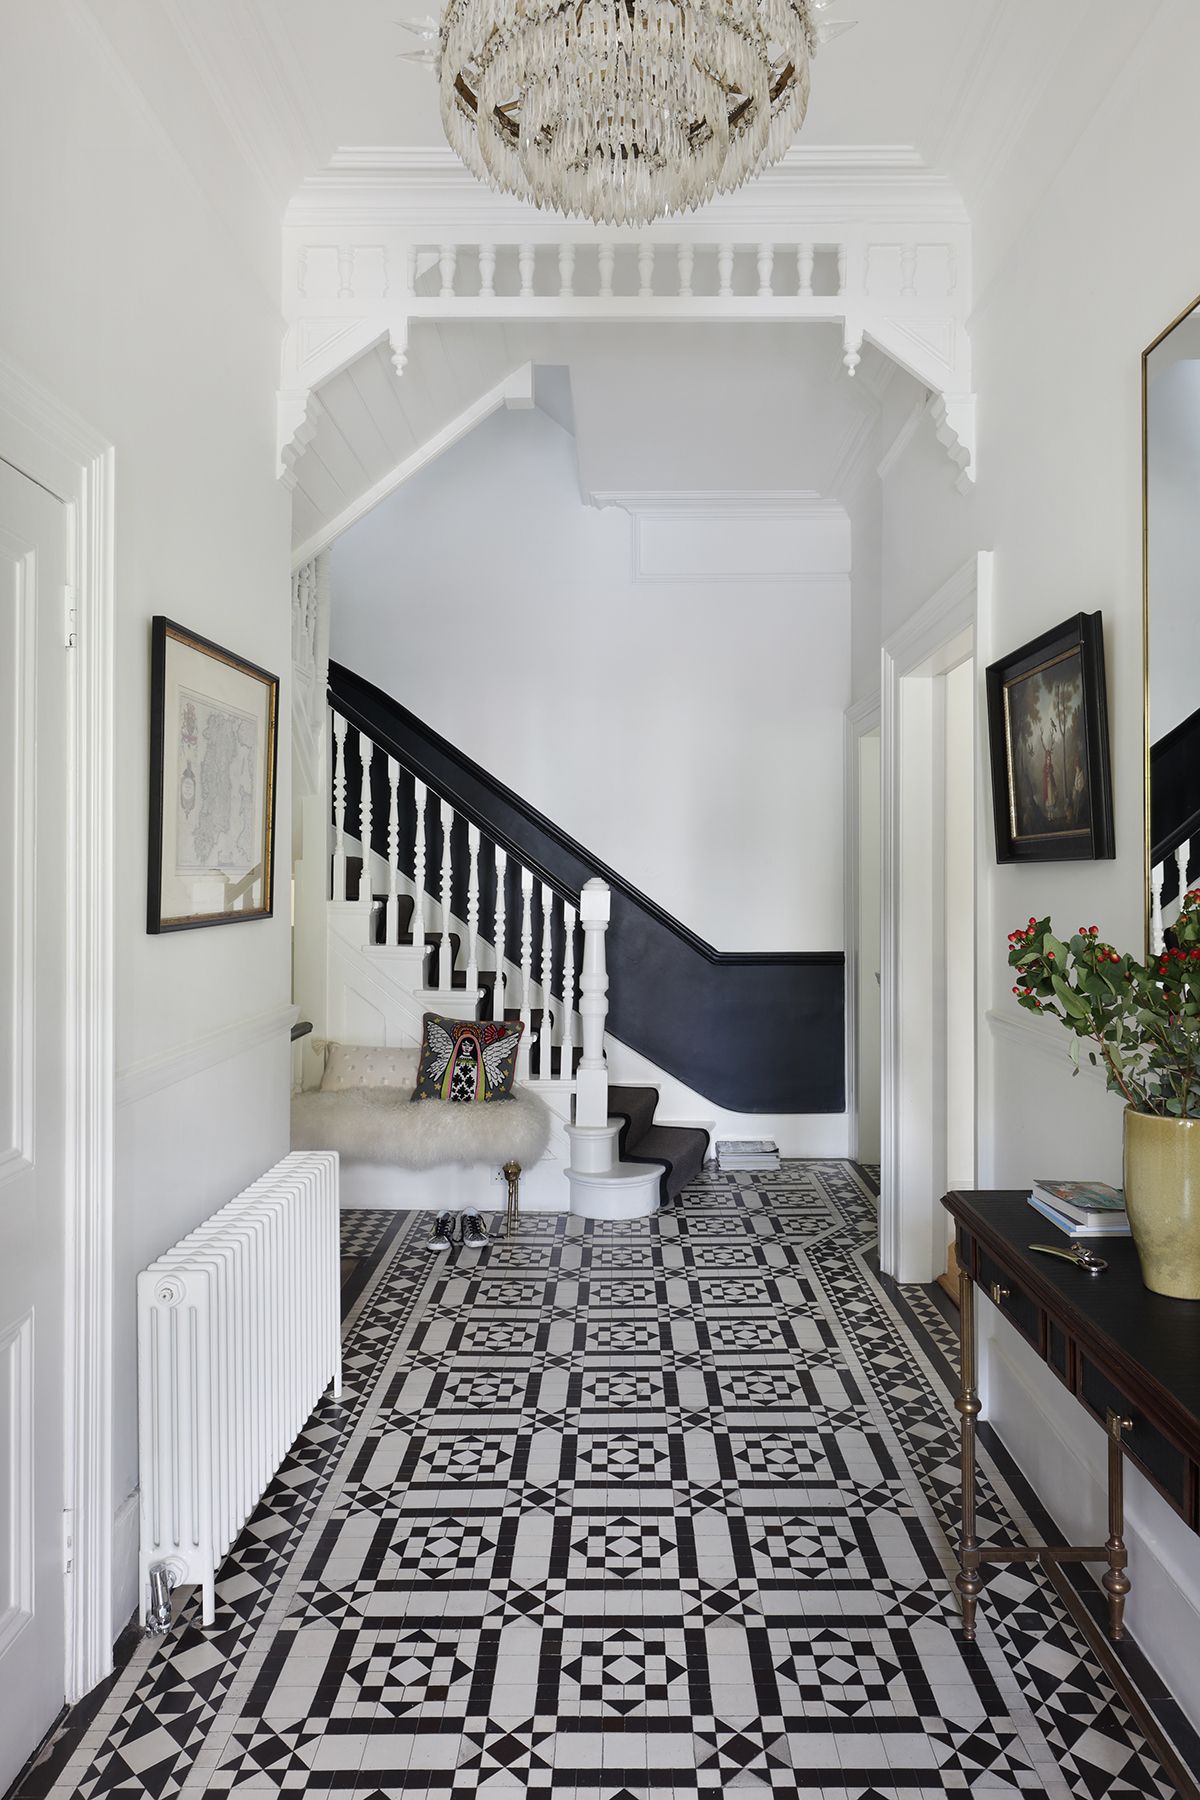 21 Hallway Floor Ideas To Create A Practical And Beautiful Entrance To Your  Home |